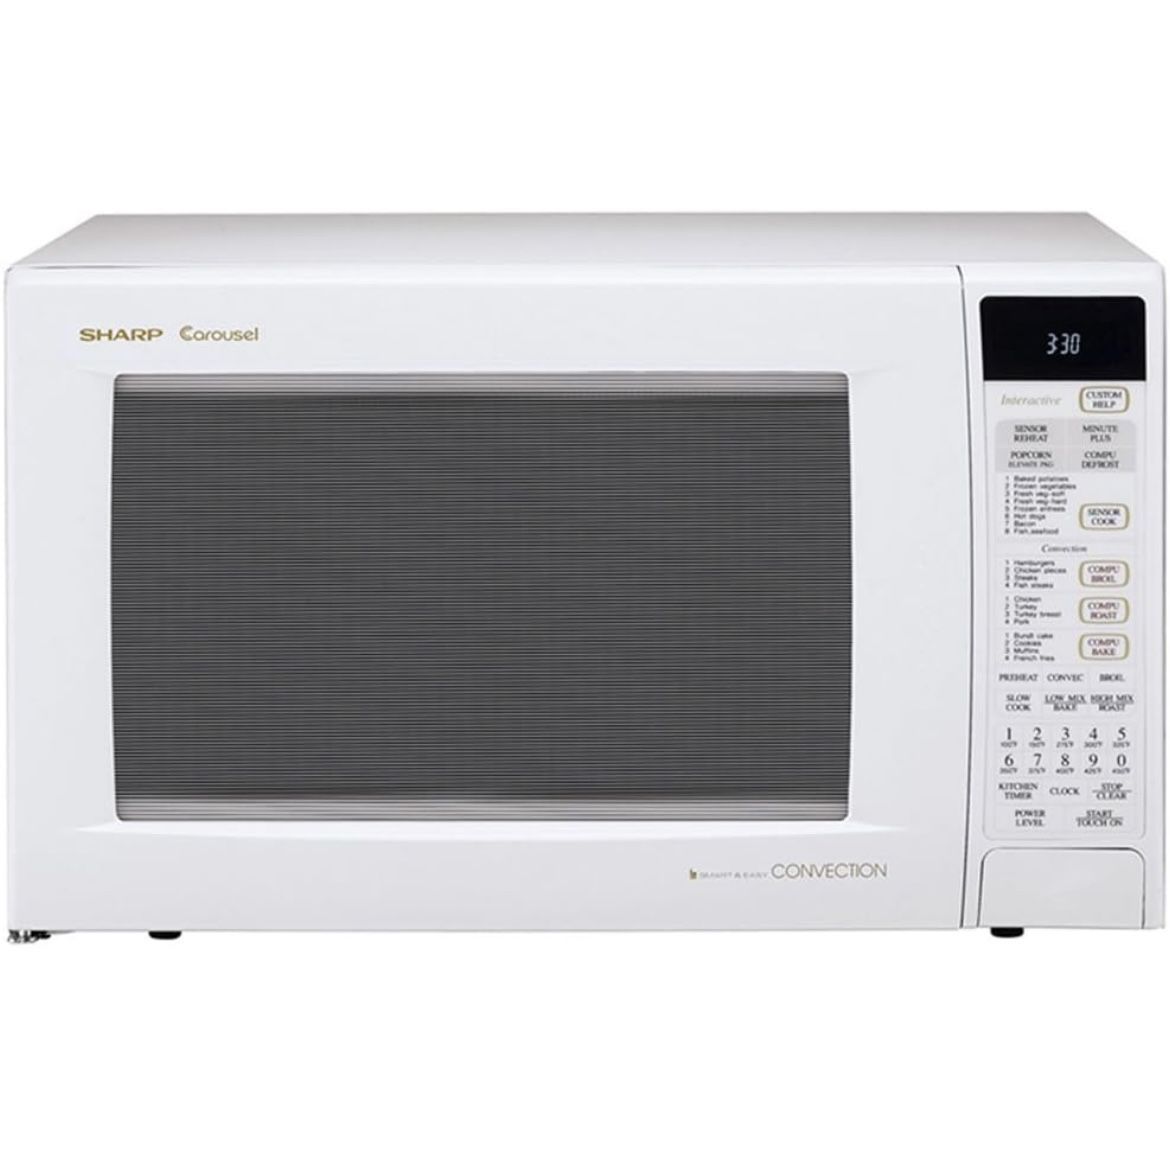 NEW Sharp Convection Microwave 1.5 Cu Ft